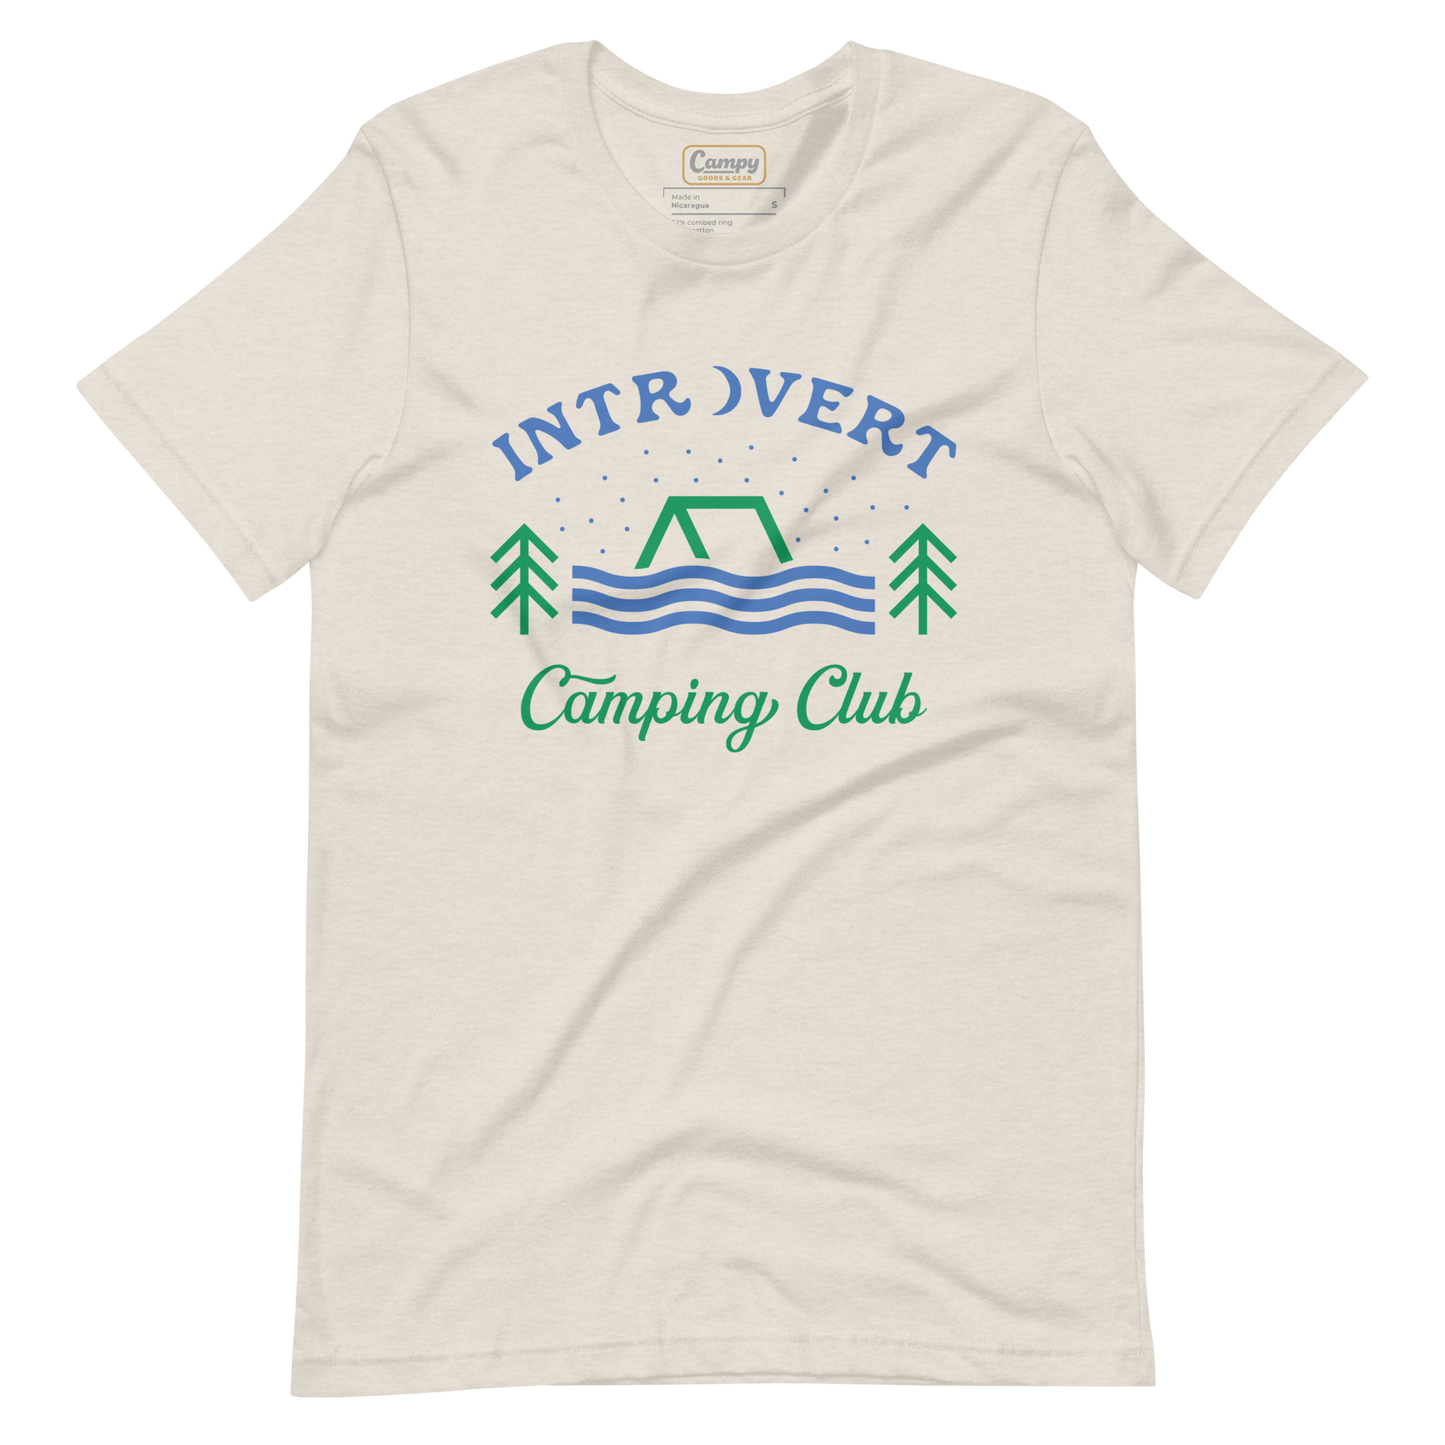 Introvert Camping Club Tee